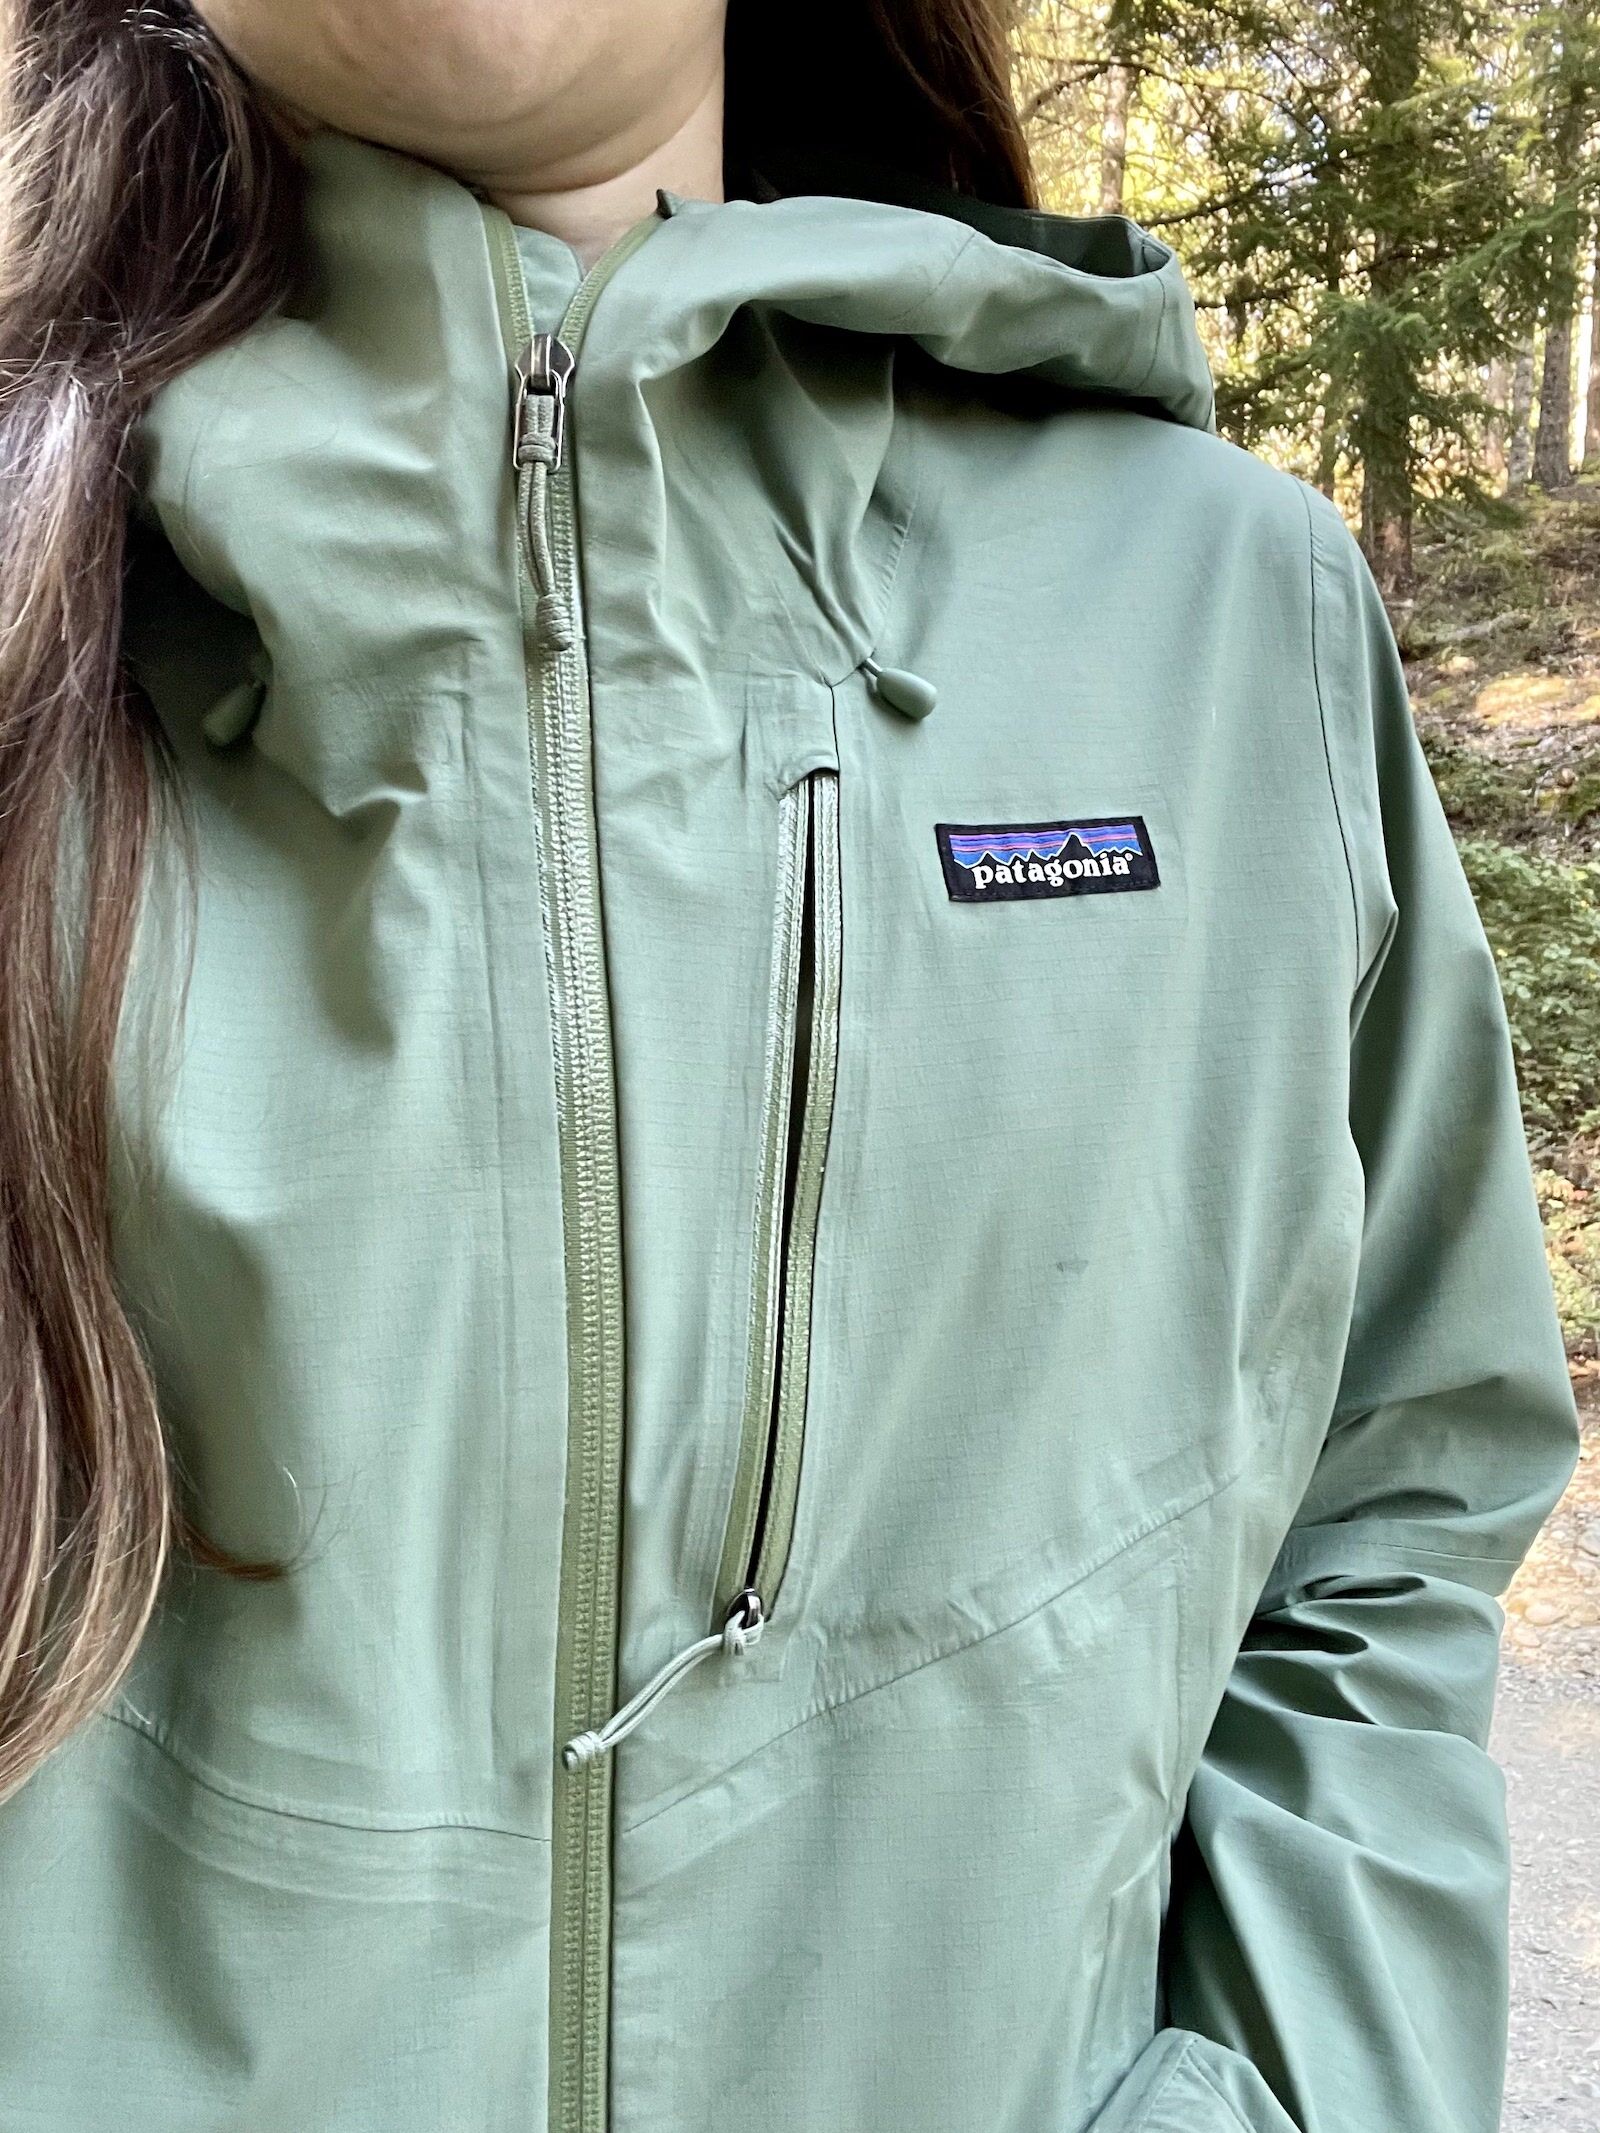 We Tested Patagonia Rain Jackets in the Real World and These Are the 6 Best